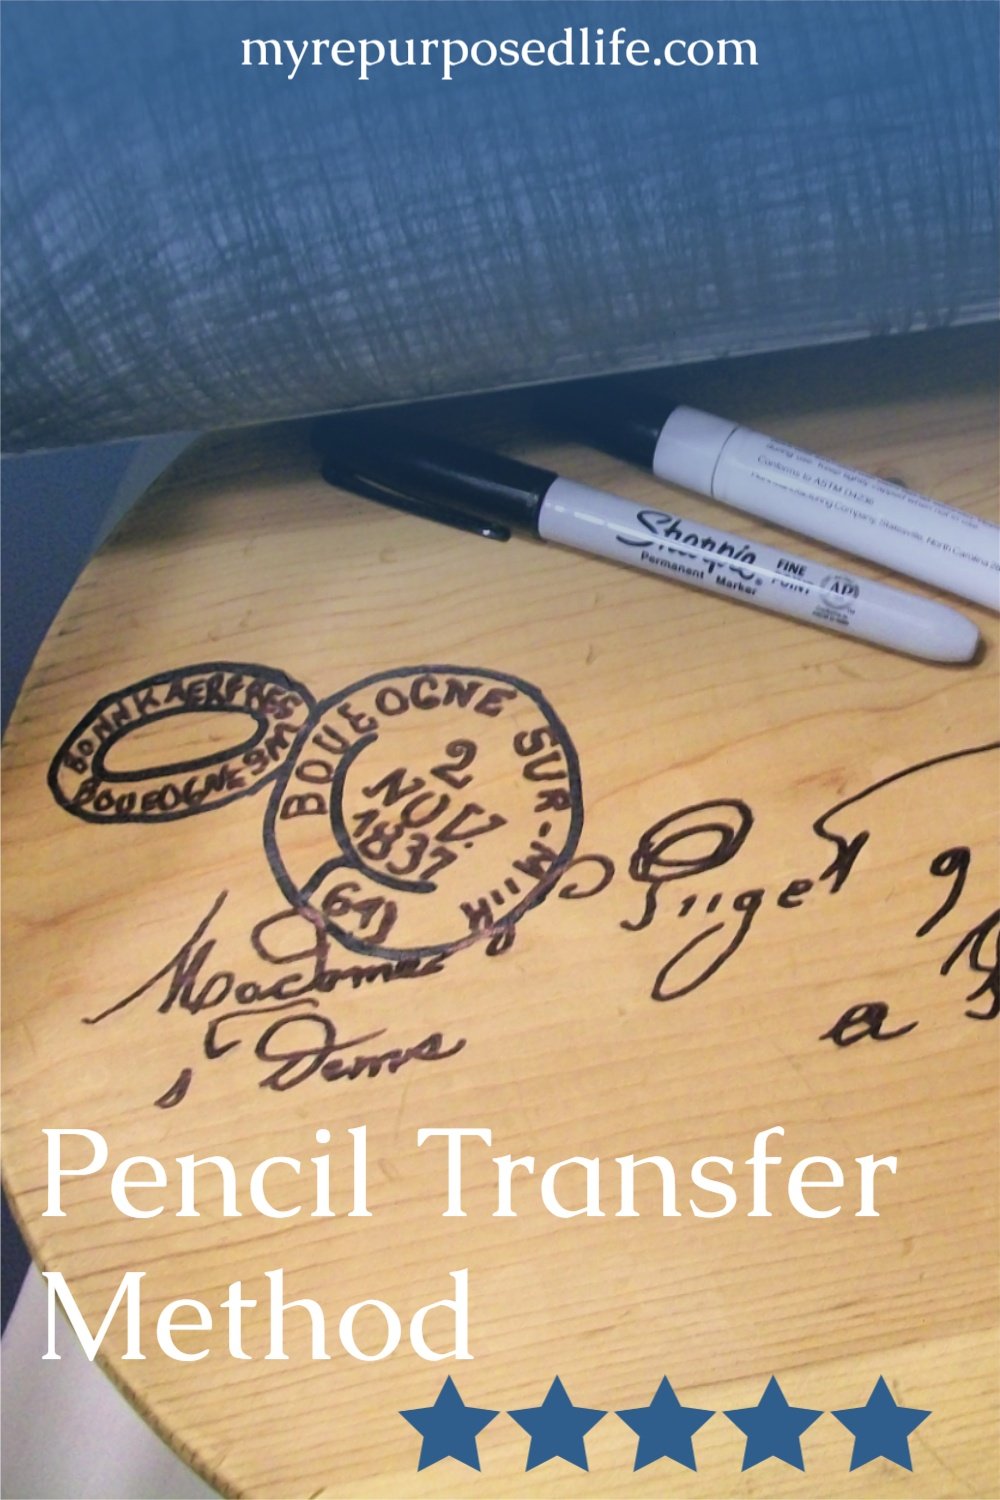 How to do a pencil transfer, turning a plain stool or piece of furniture into something special. Easy DIY directions that anyone can do. #MyRepurposedLife #upcycle #imagetransfer #penciltransfermethod #smallstool #makeover via @repurposedlife